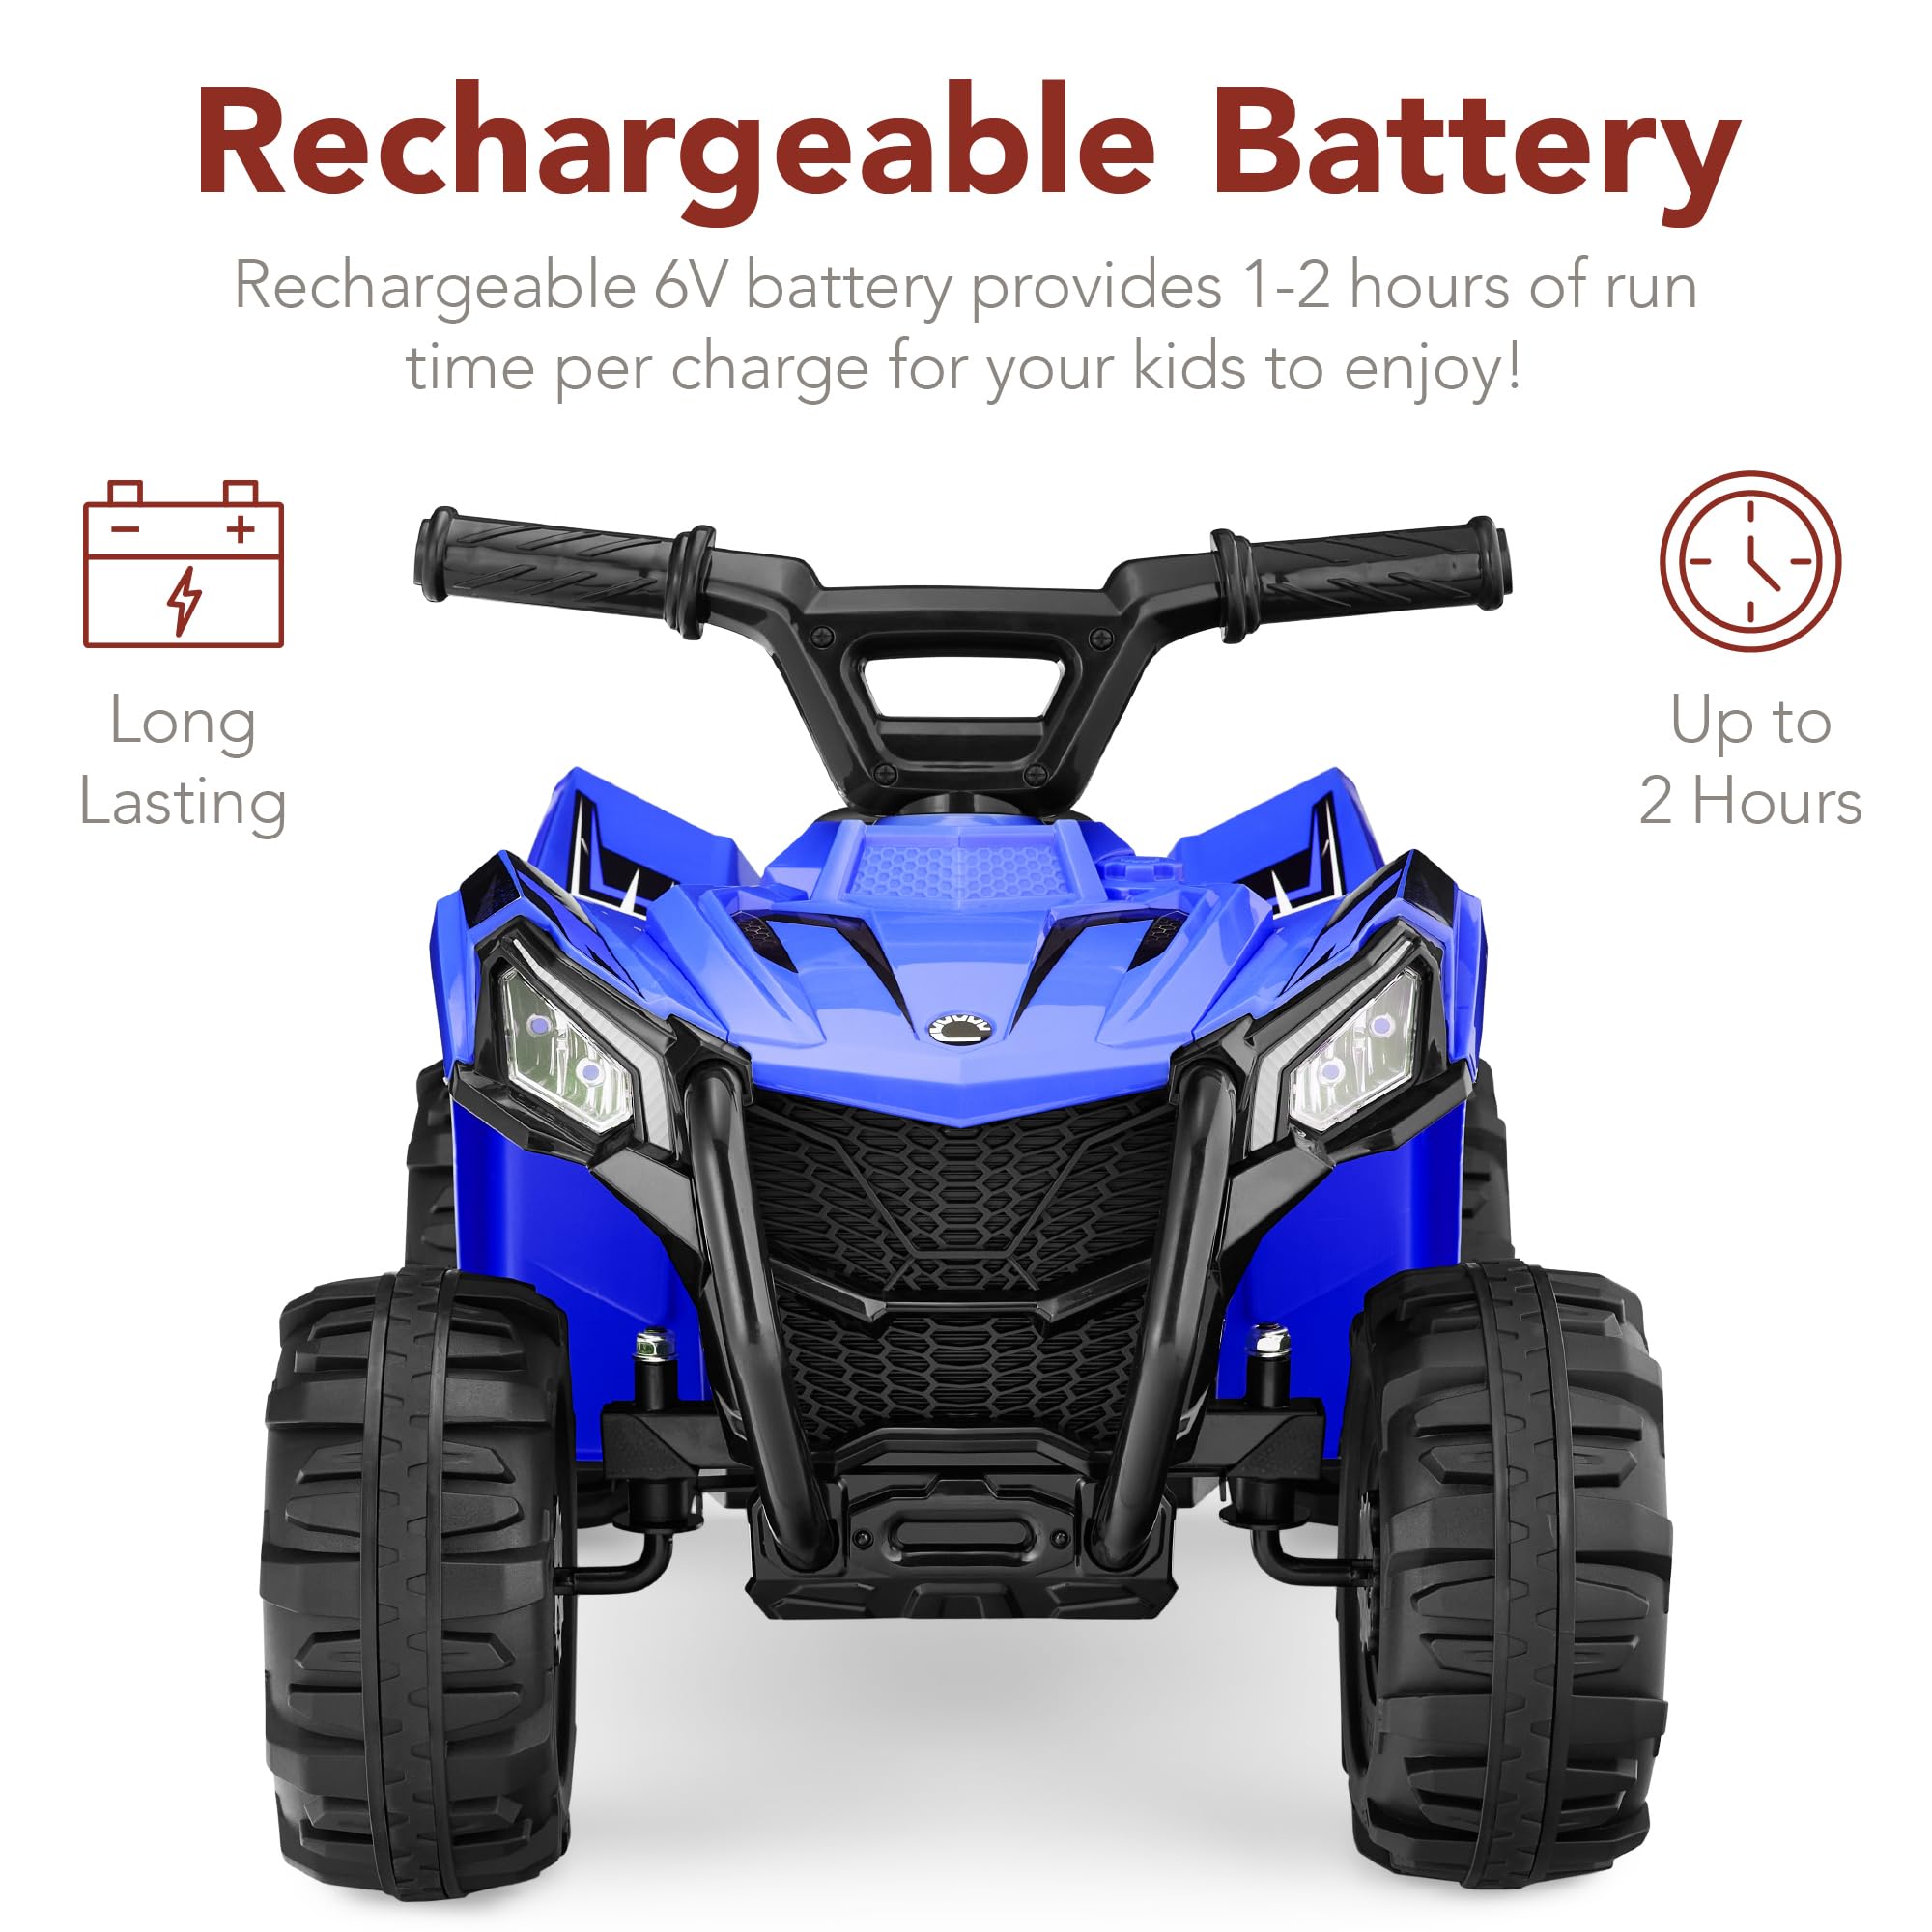 Best Choice Products 6V Kids Ride On Toy, 4-Wheeler Quad ATV Play Car w/ 1.8MPH Max Speed, Treaded Tires, Rubber Handles, Push-Button Accelerator - Blue